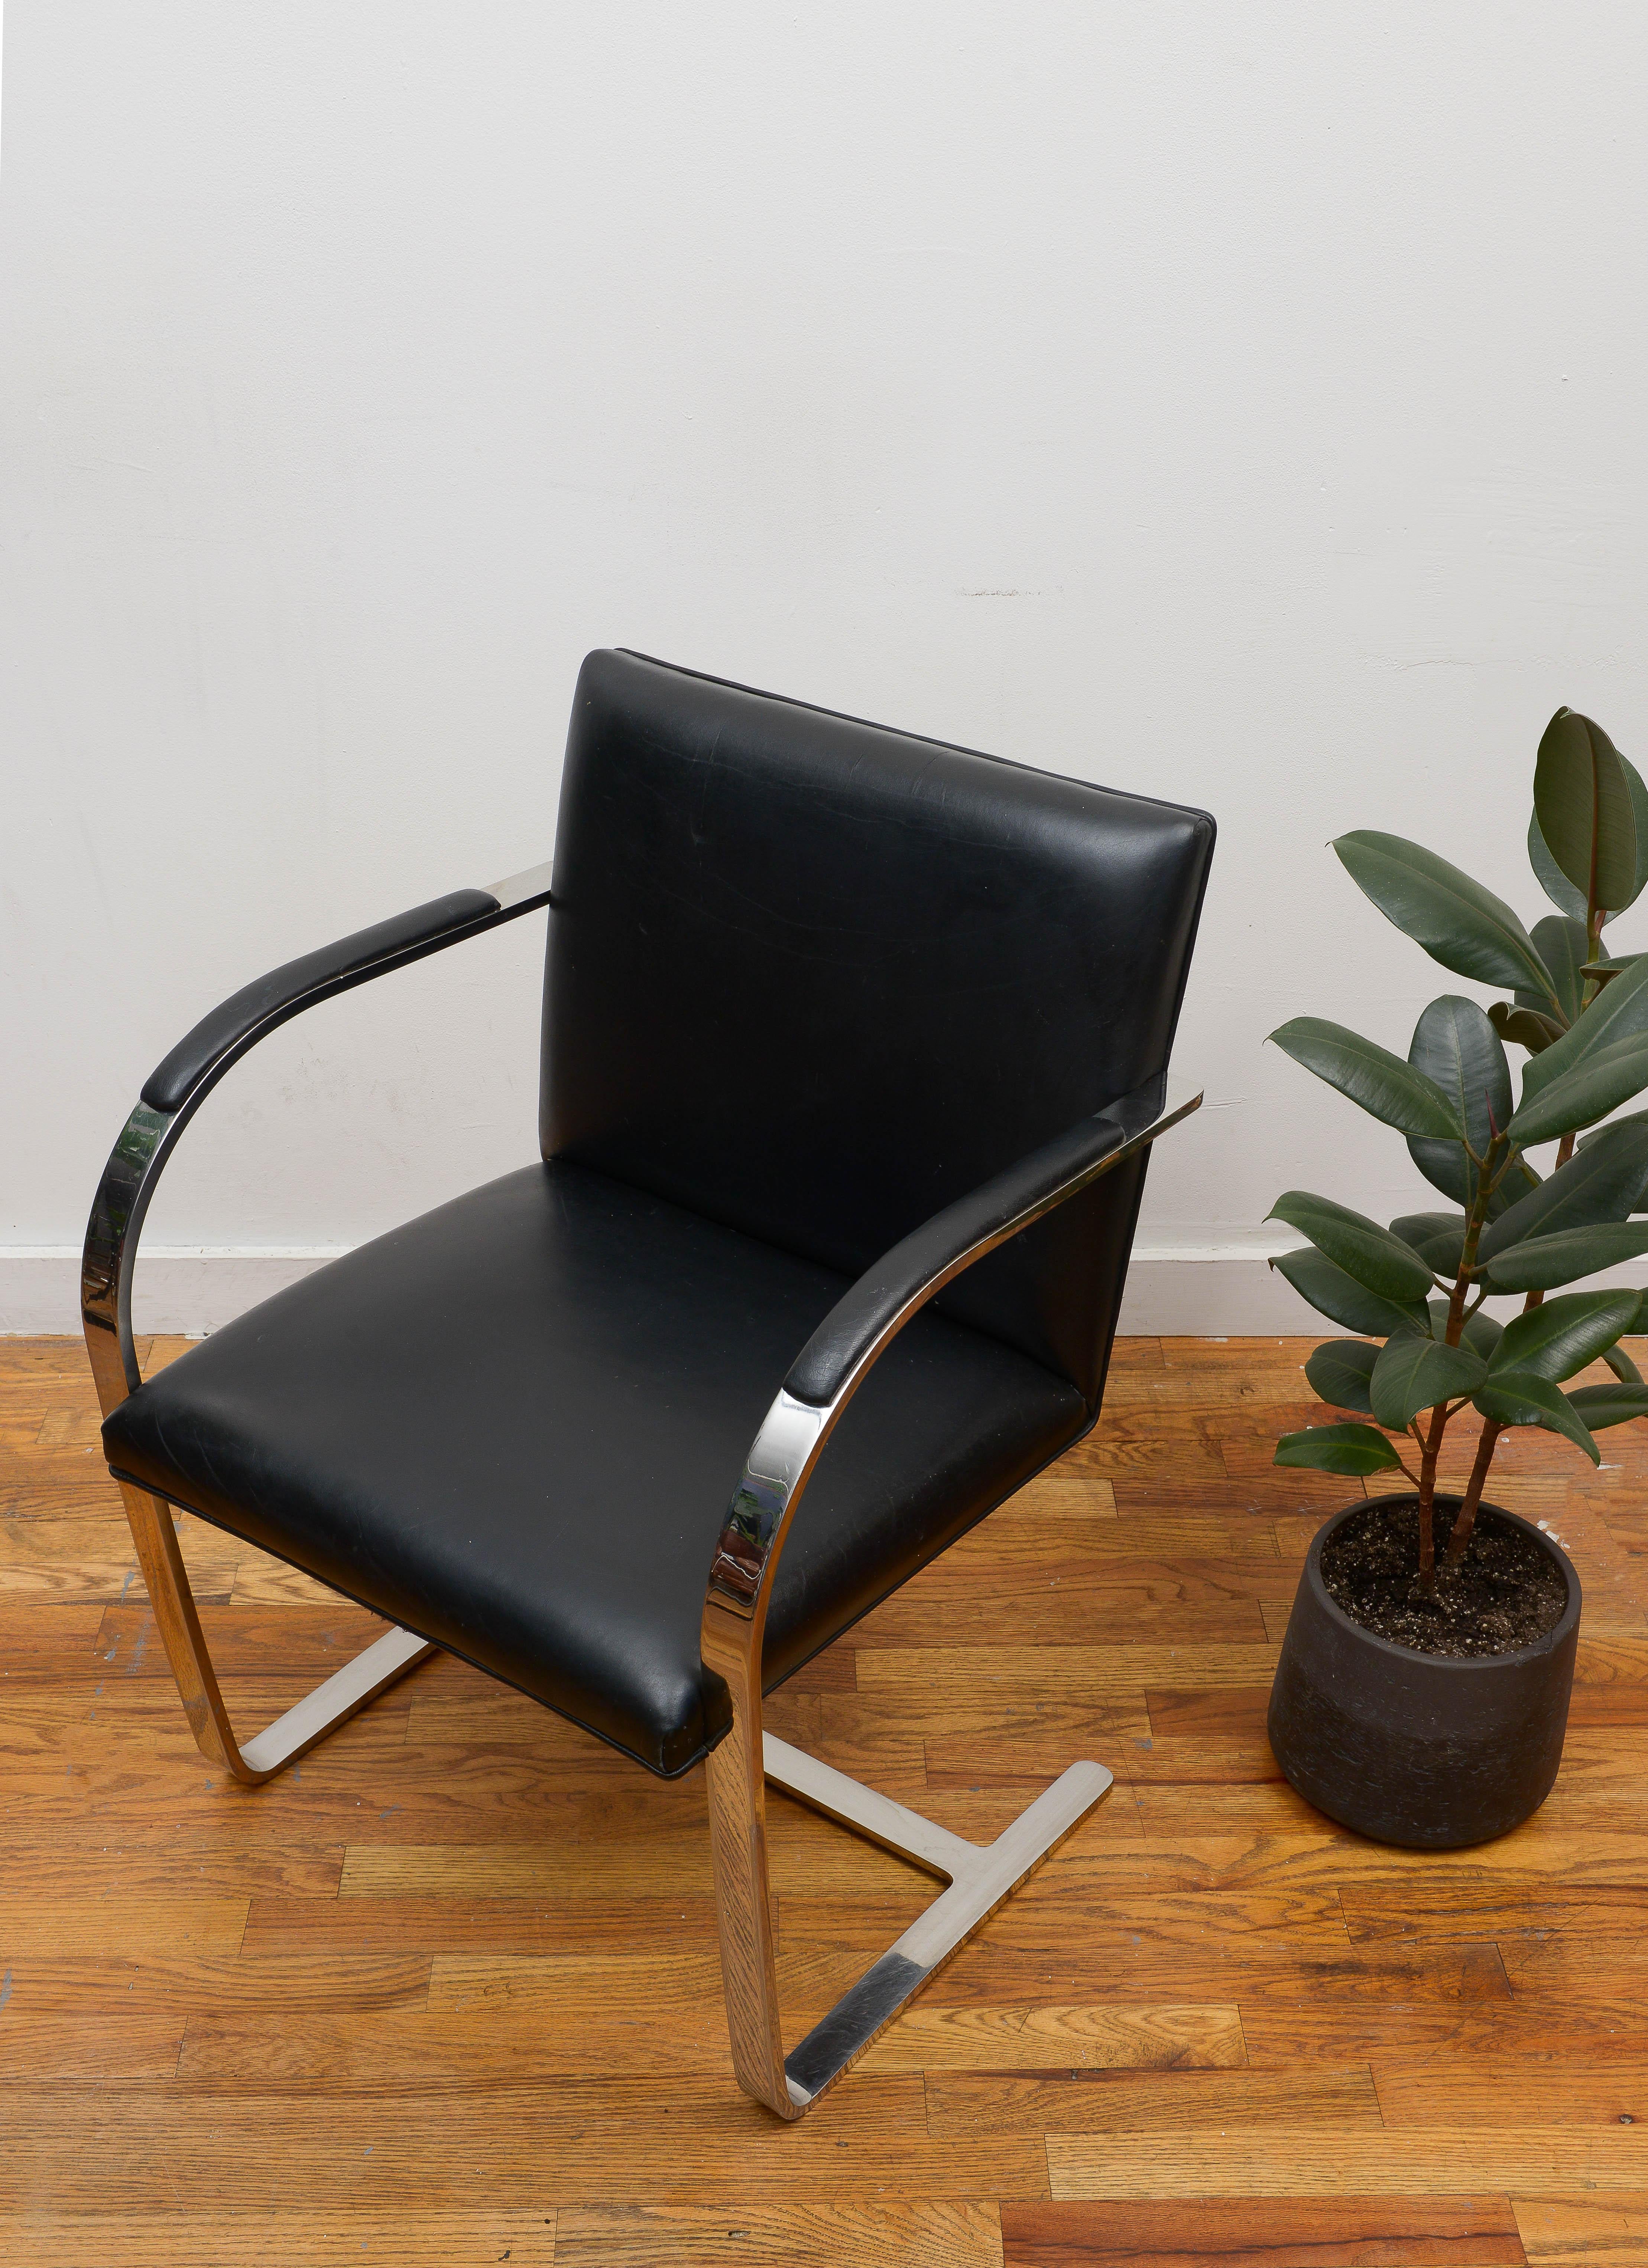 Plated Iconic Mies van der Rohe BRNO Flat Bar Chair in Black Leather, 1990s For Sale